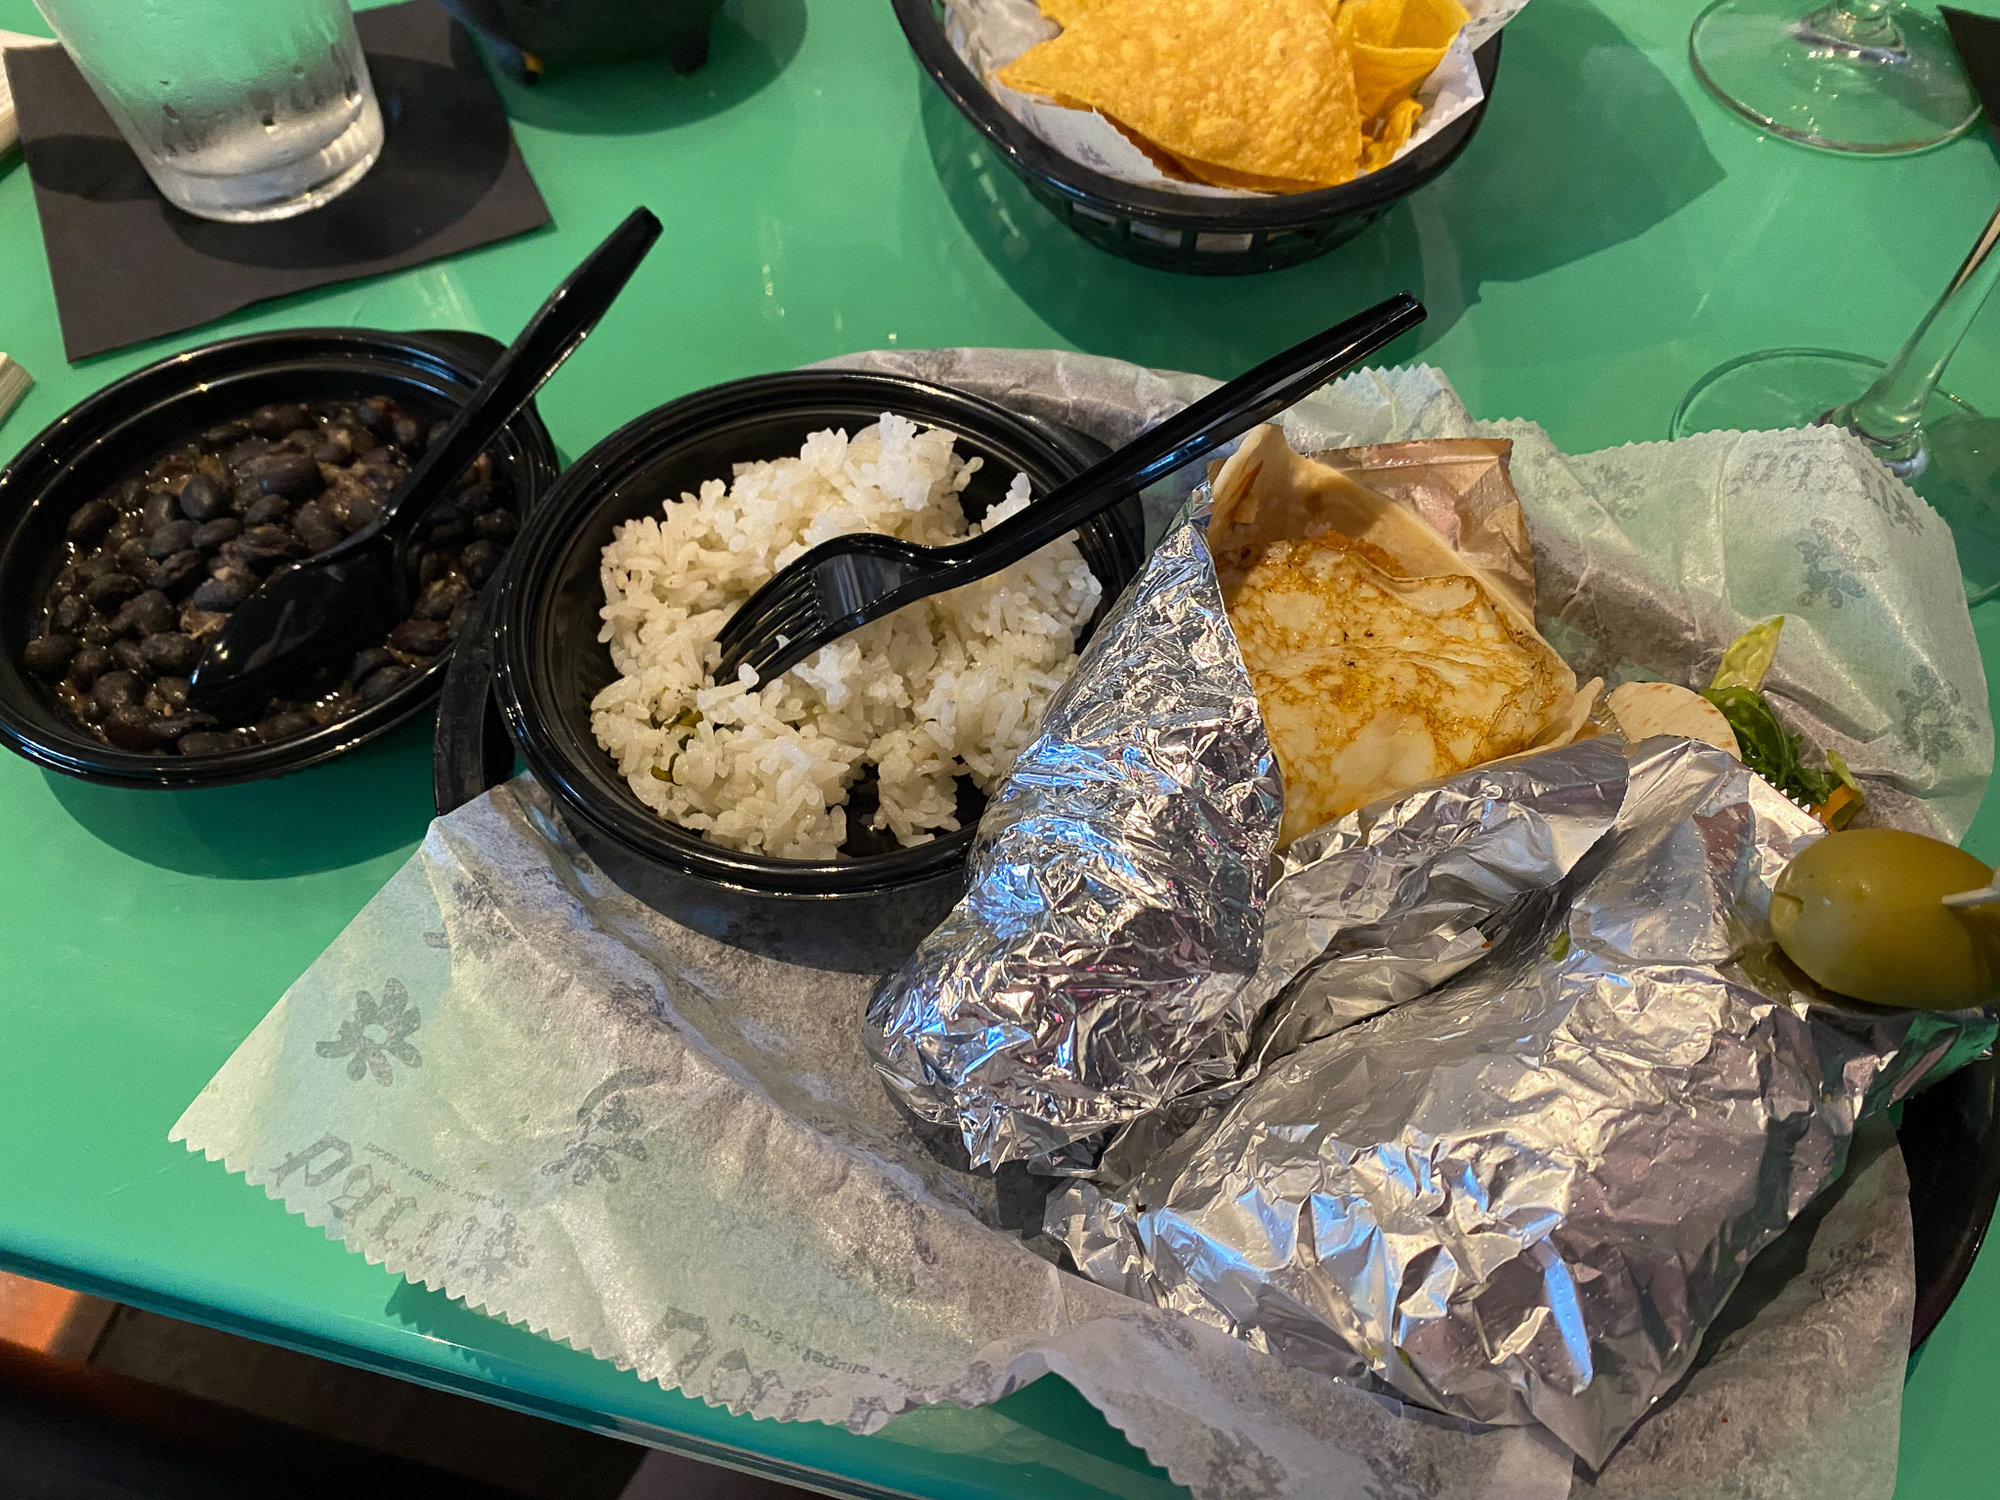 Tacos wrapped in foil